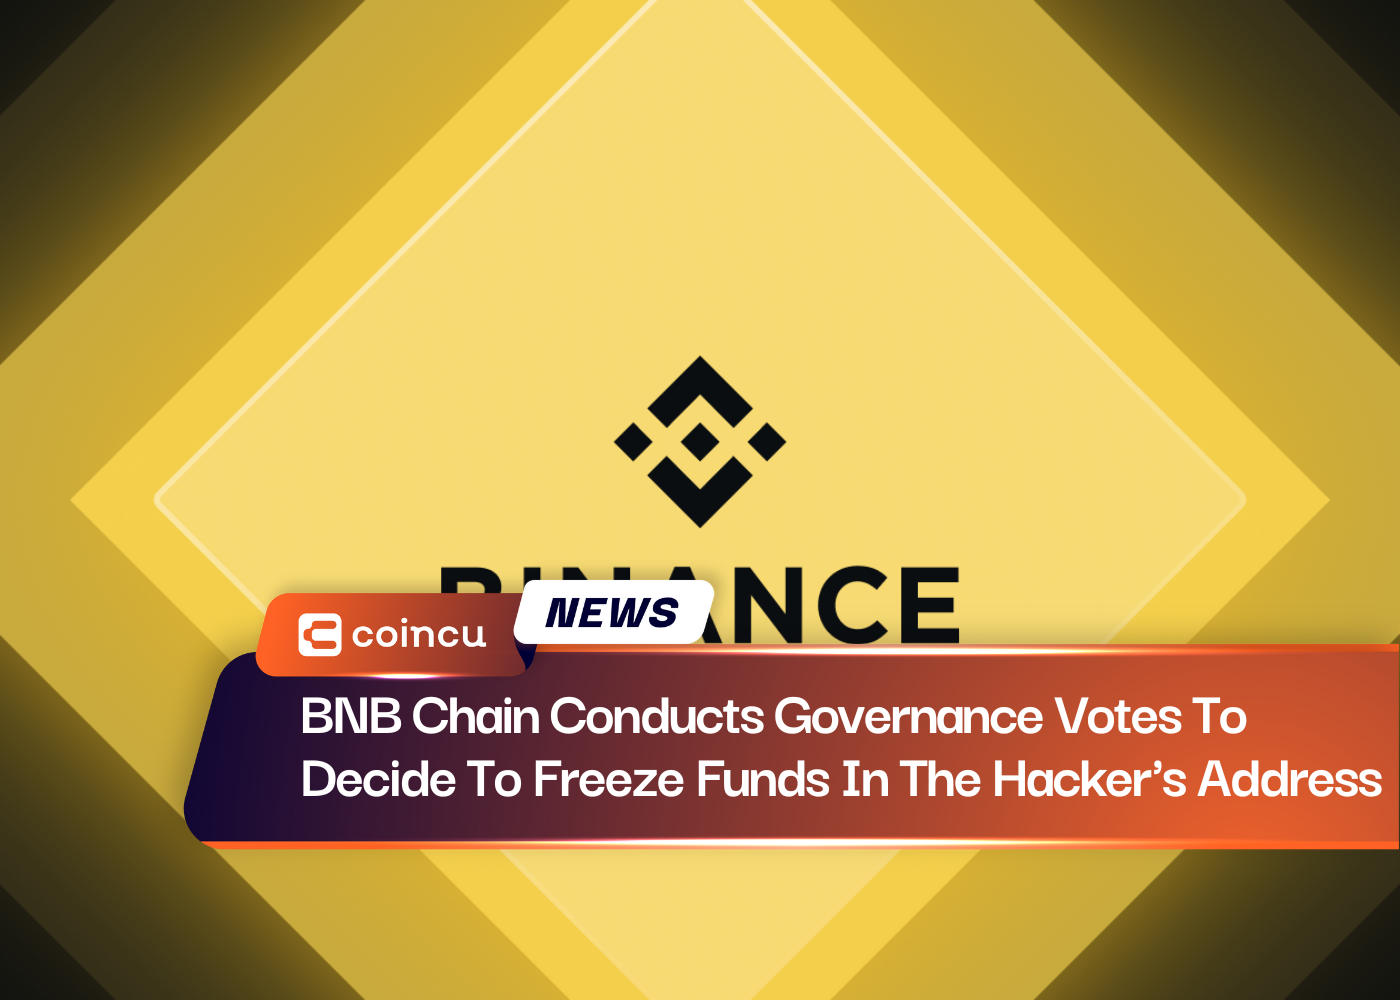 BNB Chain Conducts Governance Votes To Decide To Freeze Funds In The Hacker's Address